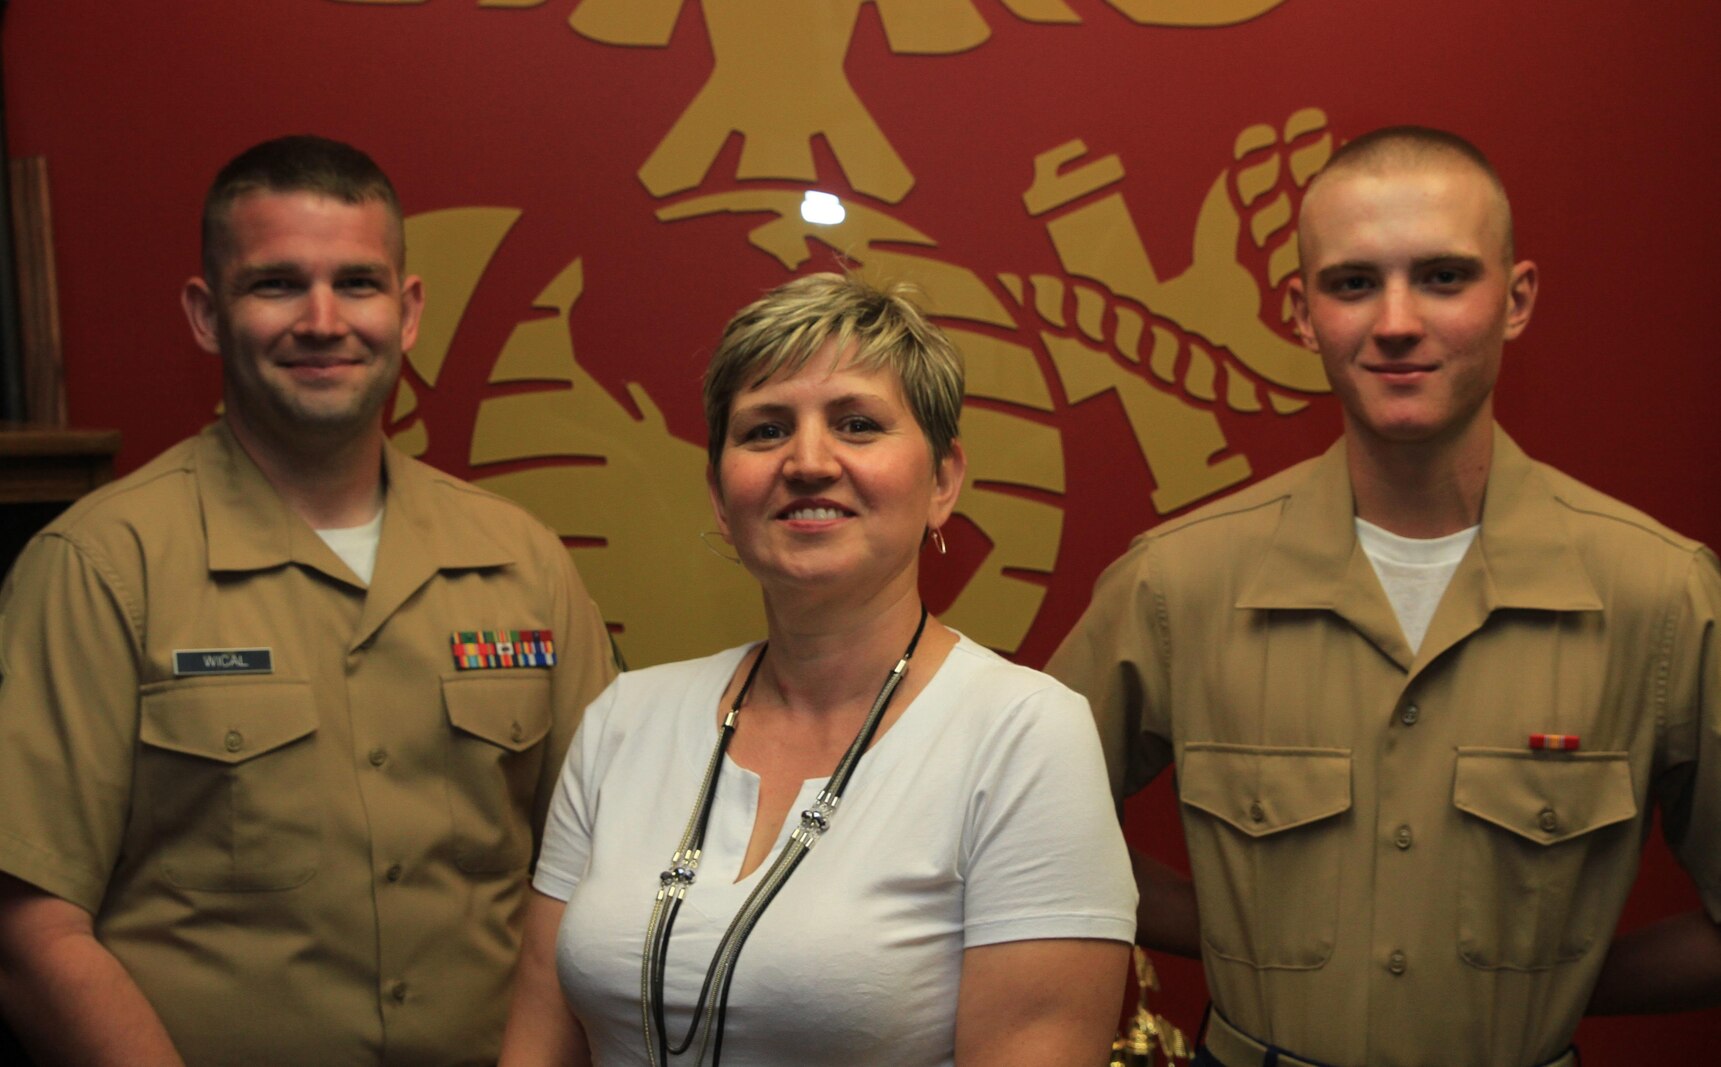 Ewa Perkowski, (middle) her son, Pvt. Dawid Perkowski (right), and Sgt. Justin Wical, take a moment to post for a photo at Marine Corps Recruiting Substation Reading, recently. Perkowski is a second-generation immigrant from Poland, where his parents knew a different meaning to military service. After some convincing from her son, and an in depth education about the Marine Corps’ rich history and traditions from Sgt. Wical, Ewa her family could not be more proud of their new Marine.